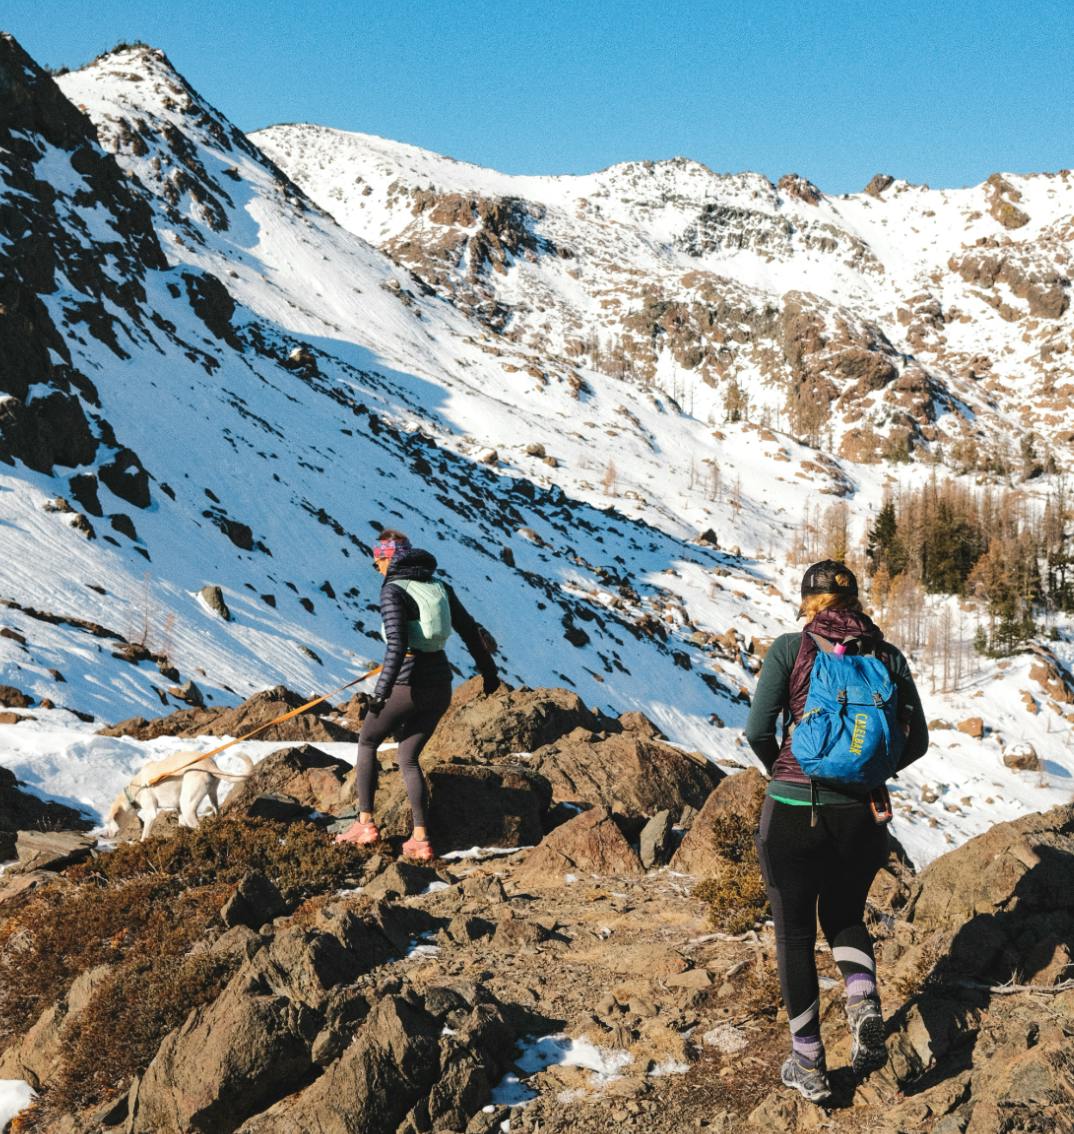 Two women with running packs navigate a snowy trail.